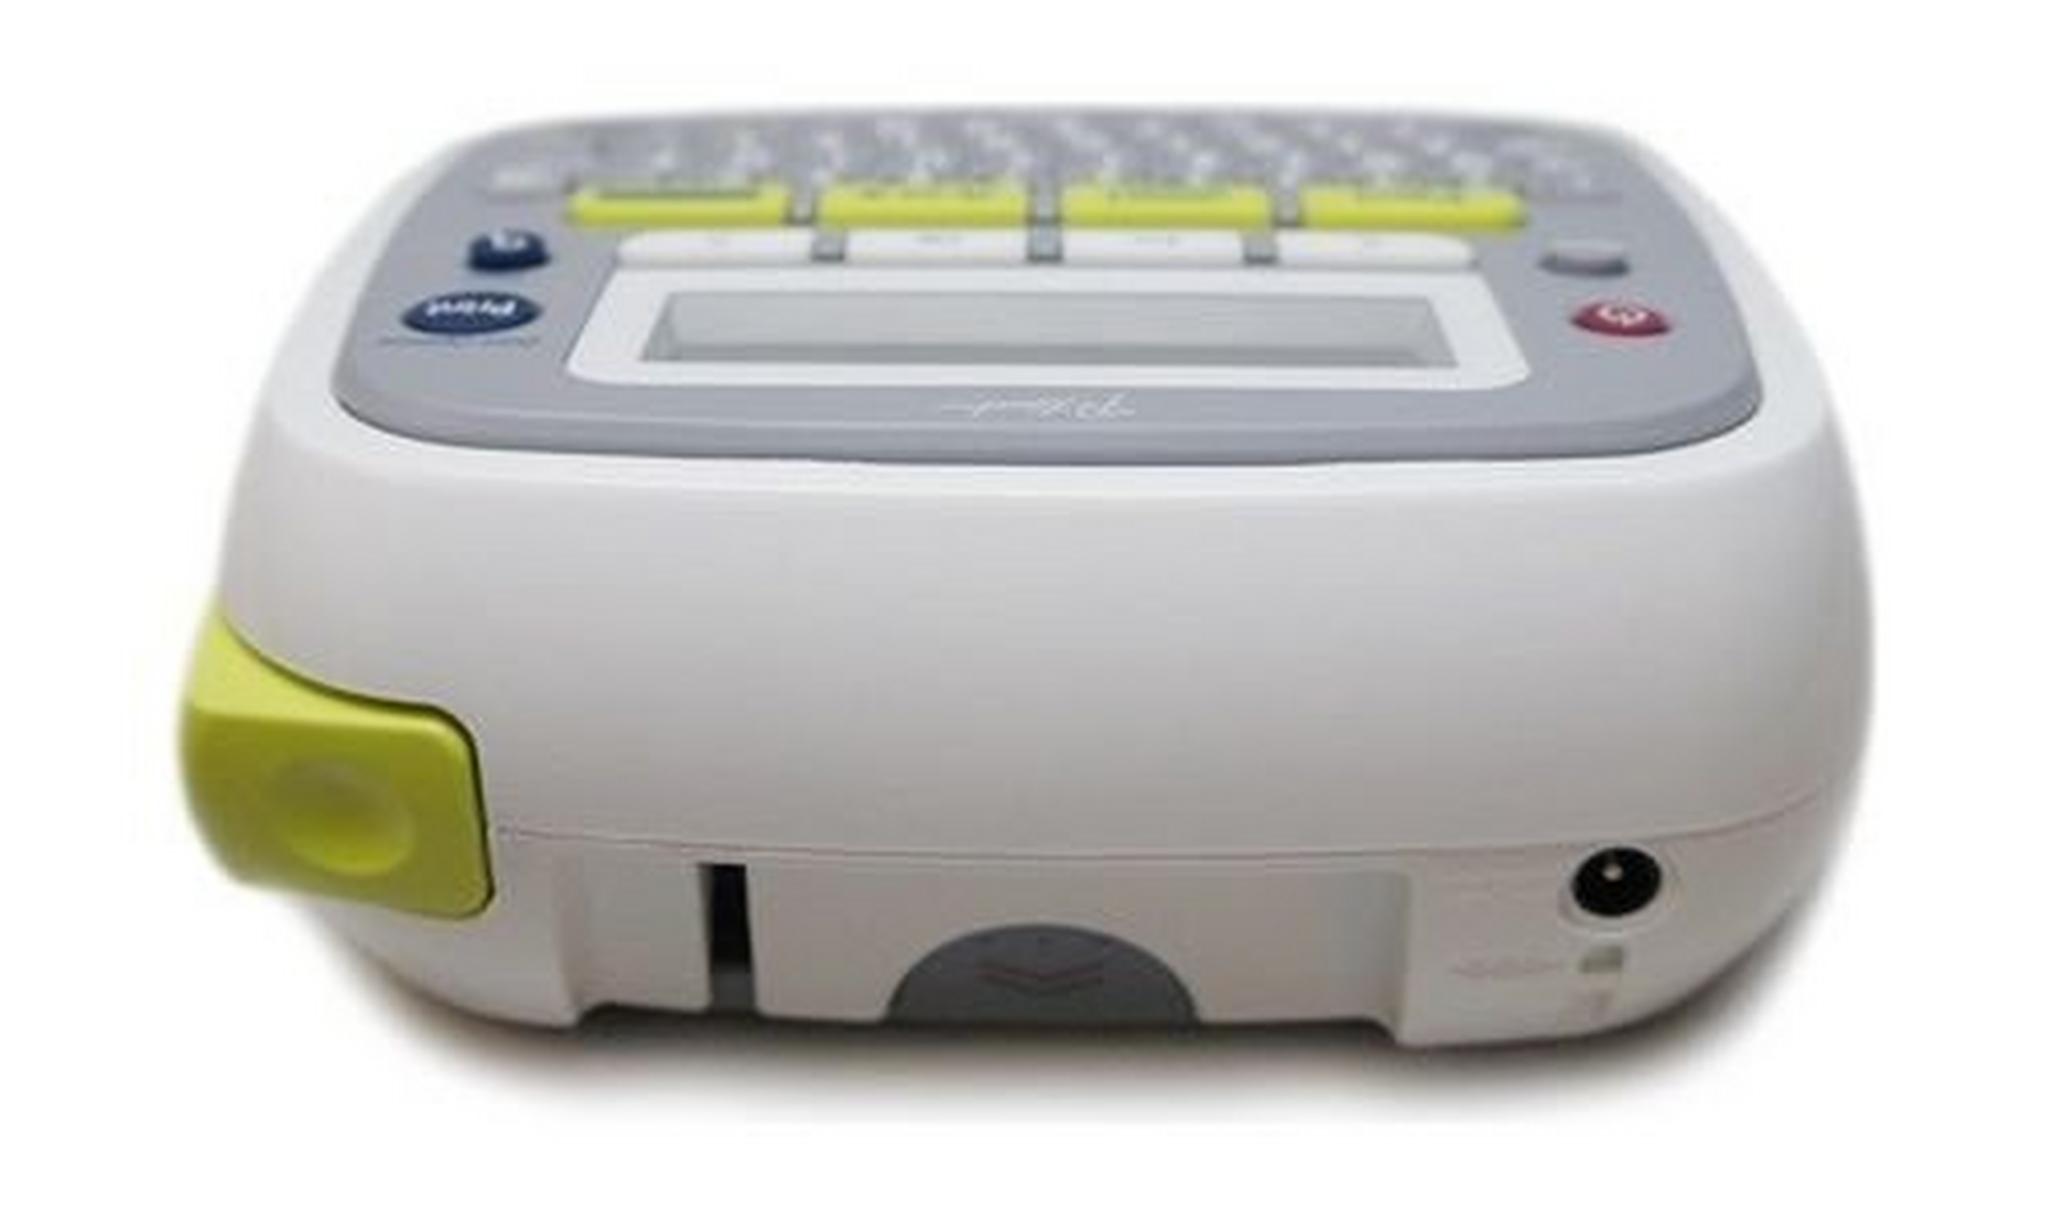 Brother P-touch English & Arabic Label Maker (PT-D200AR)